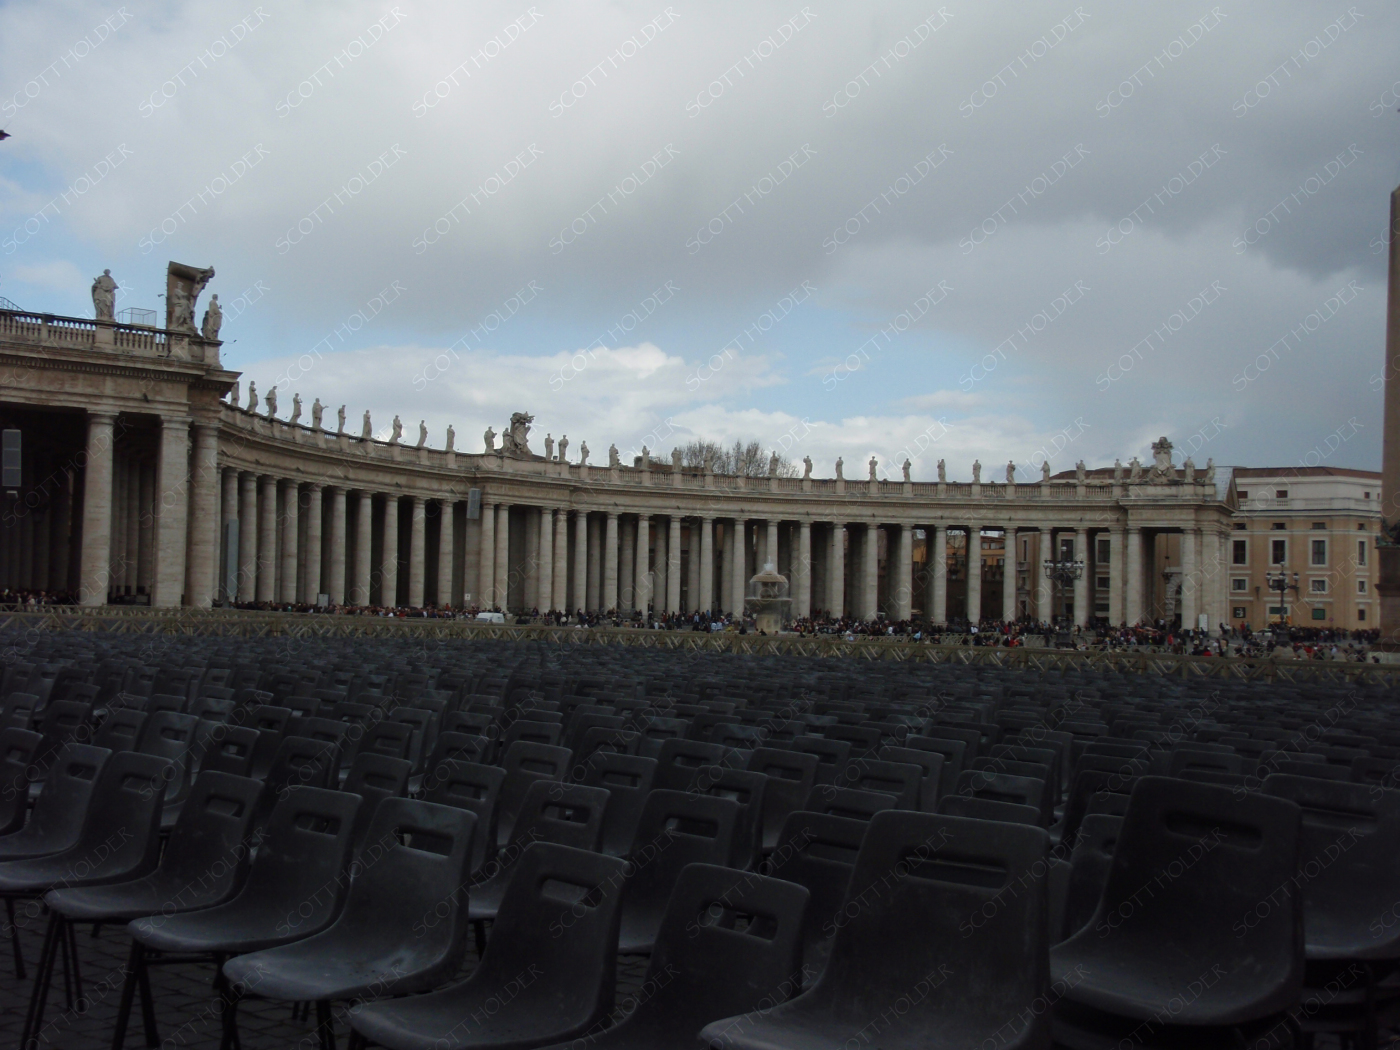 Vatican Square- Sea of Chairs for Easter Mass